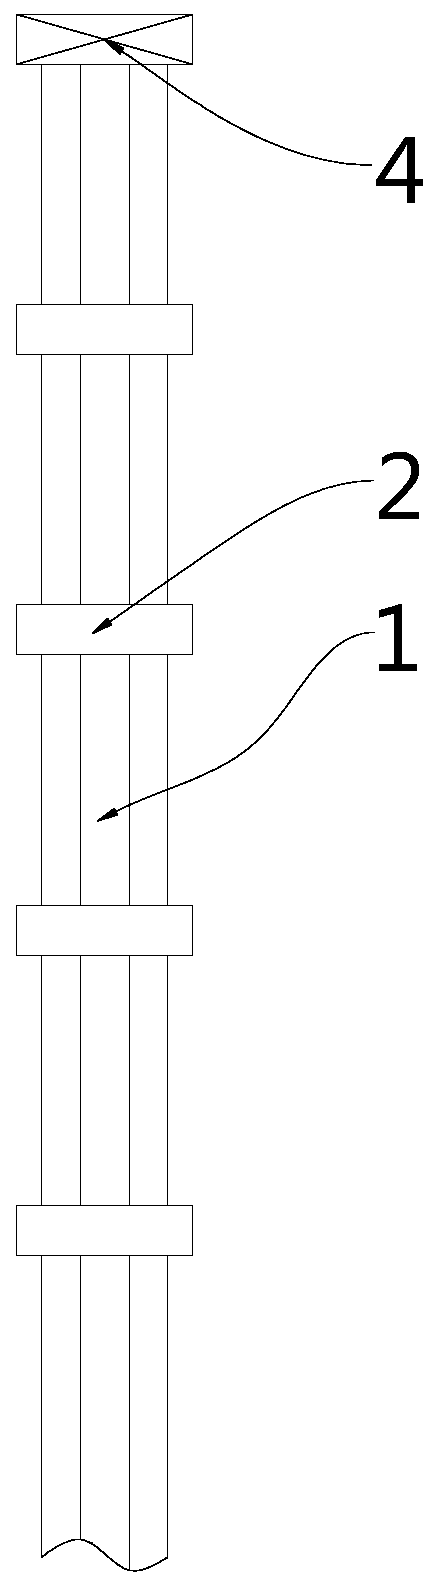 Three-lamp pole connection structure with regular triangular distribution